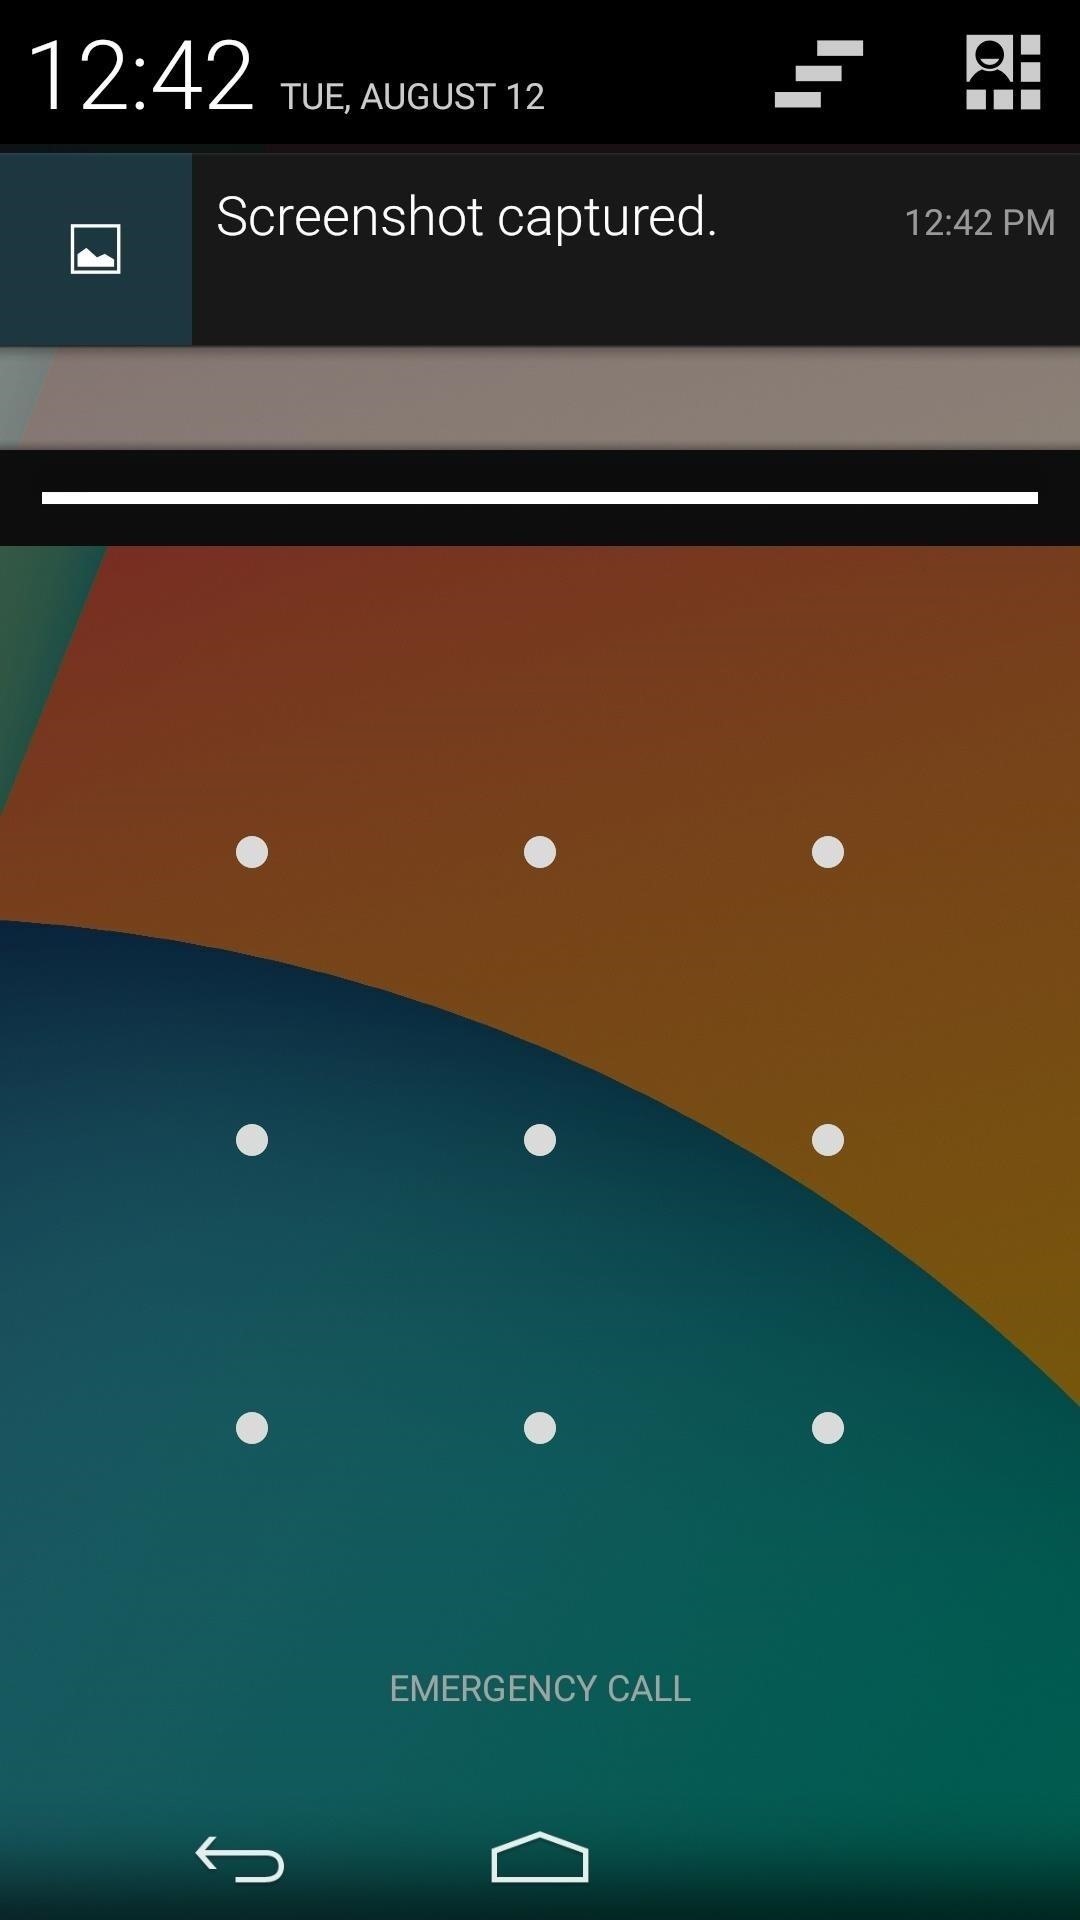 How to Add Functionality & Declutter the Android Lock Screen on Your Nexus 5